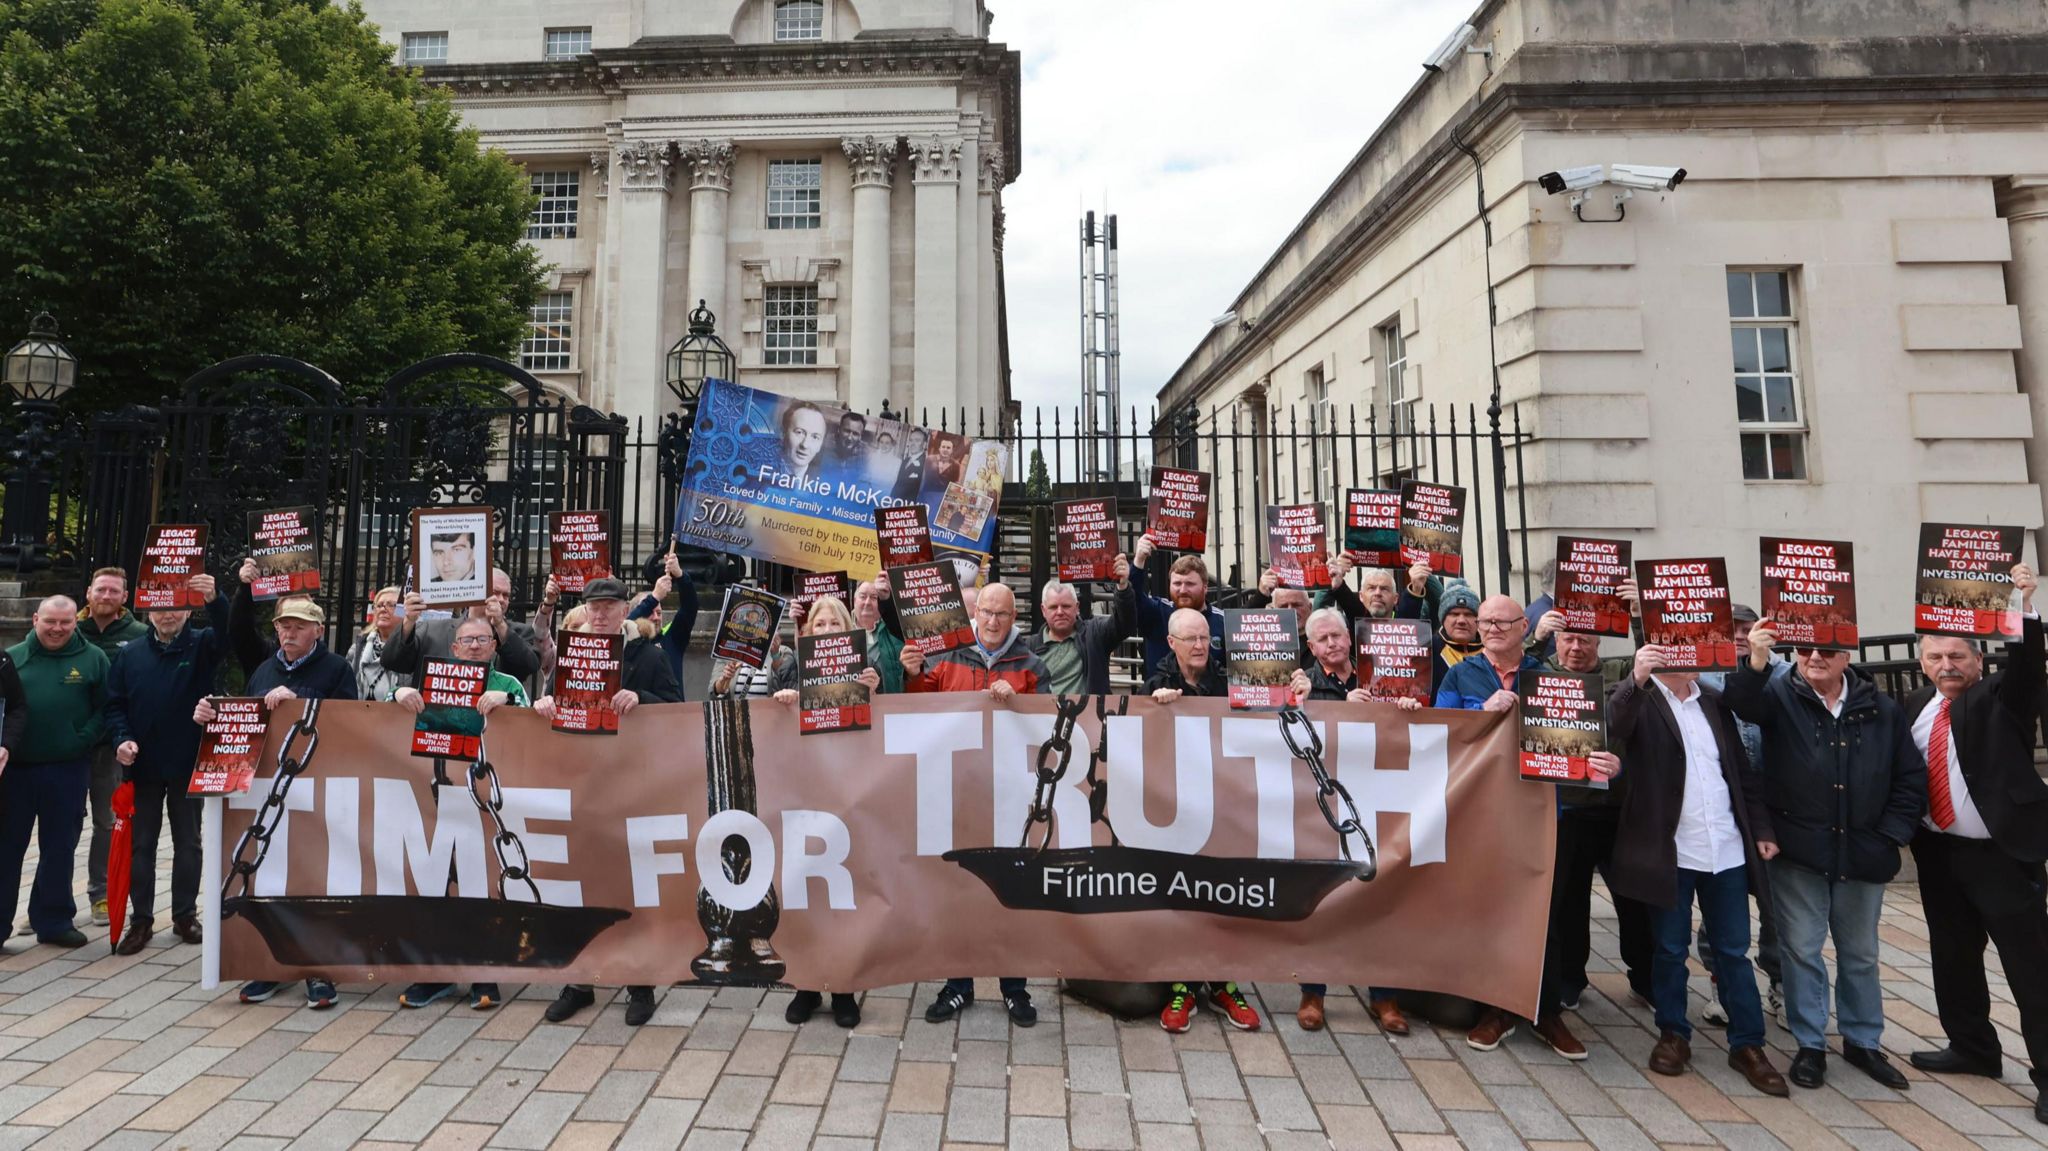 Campaigners who are challenging the Legacy Act demonstrated outside the court